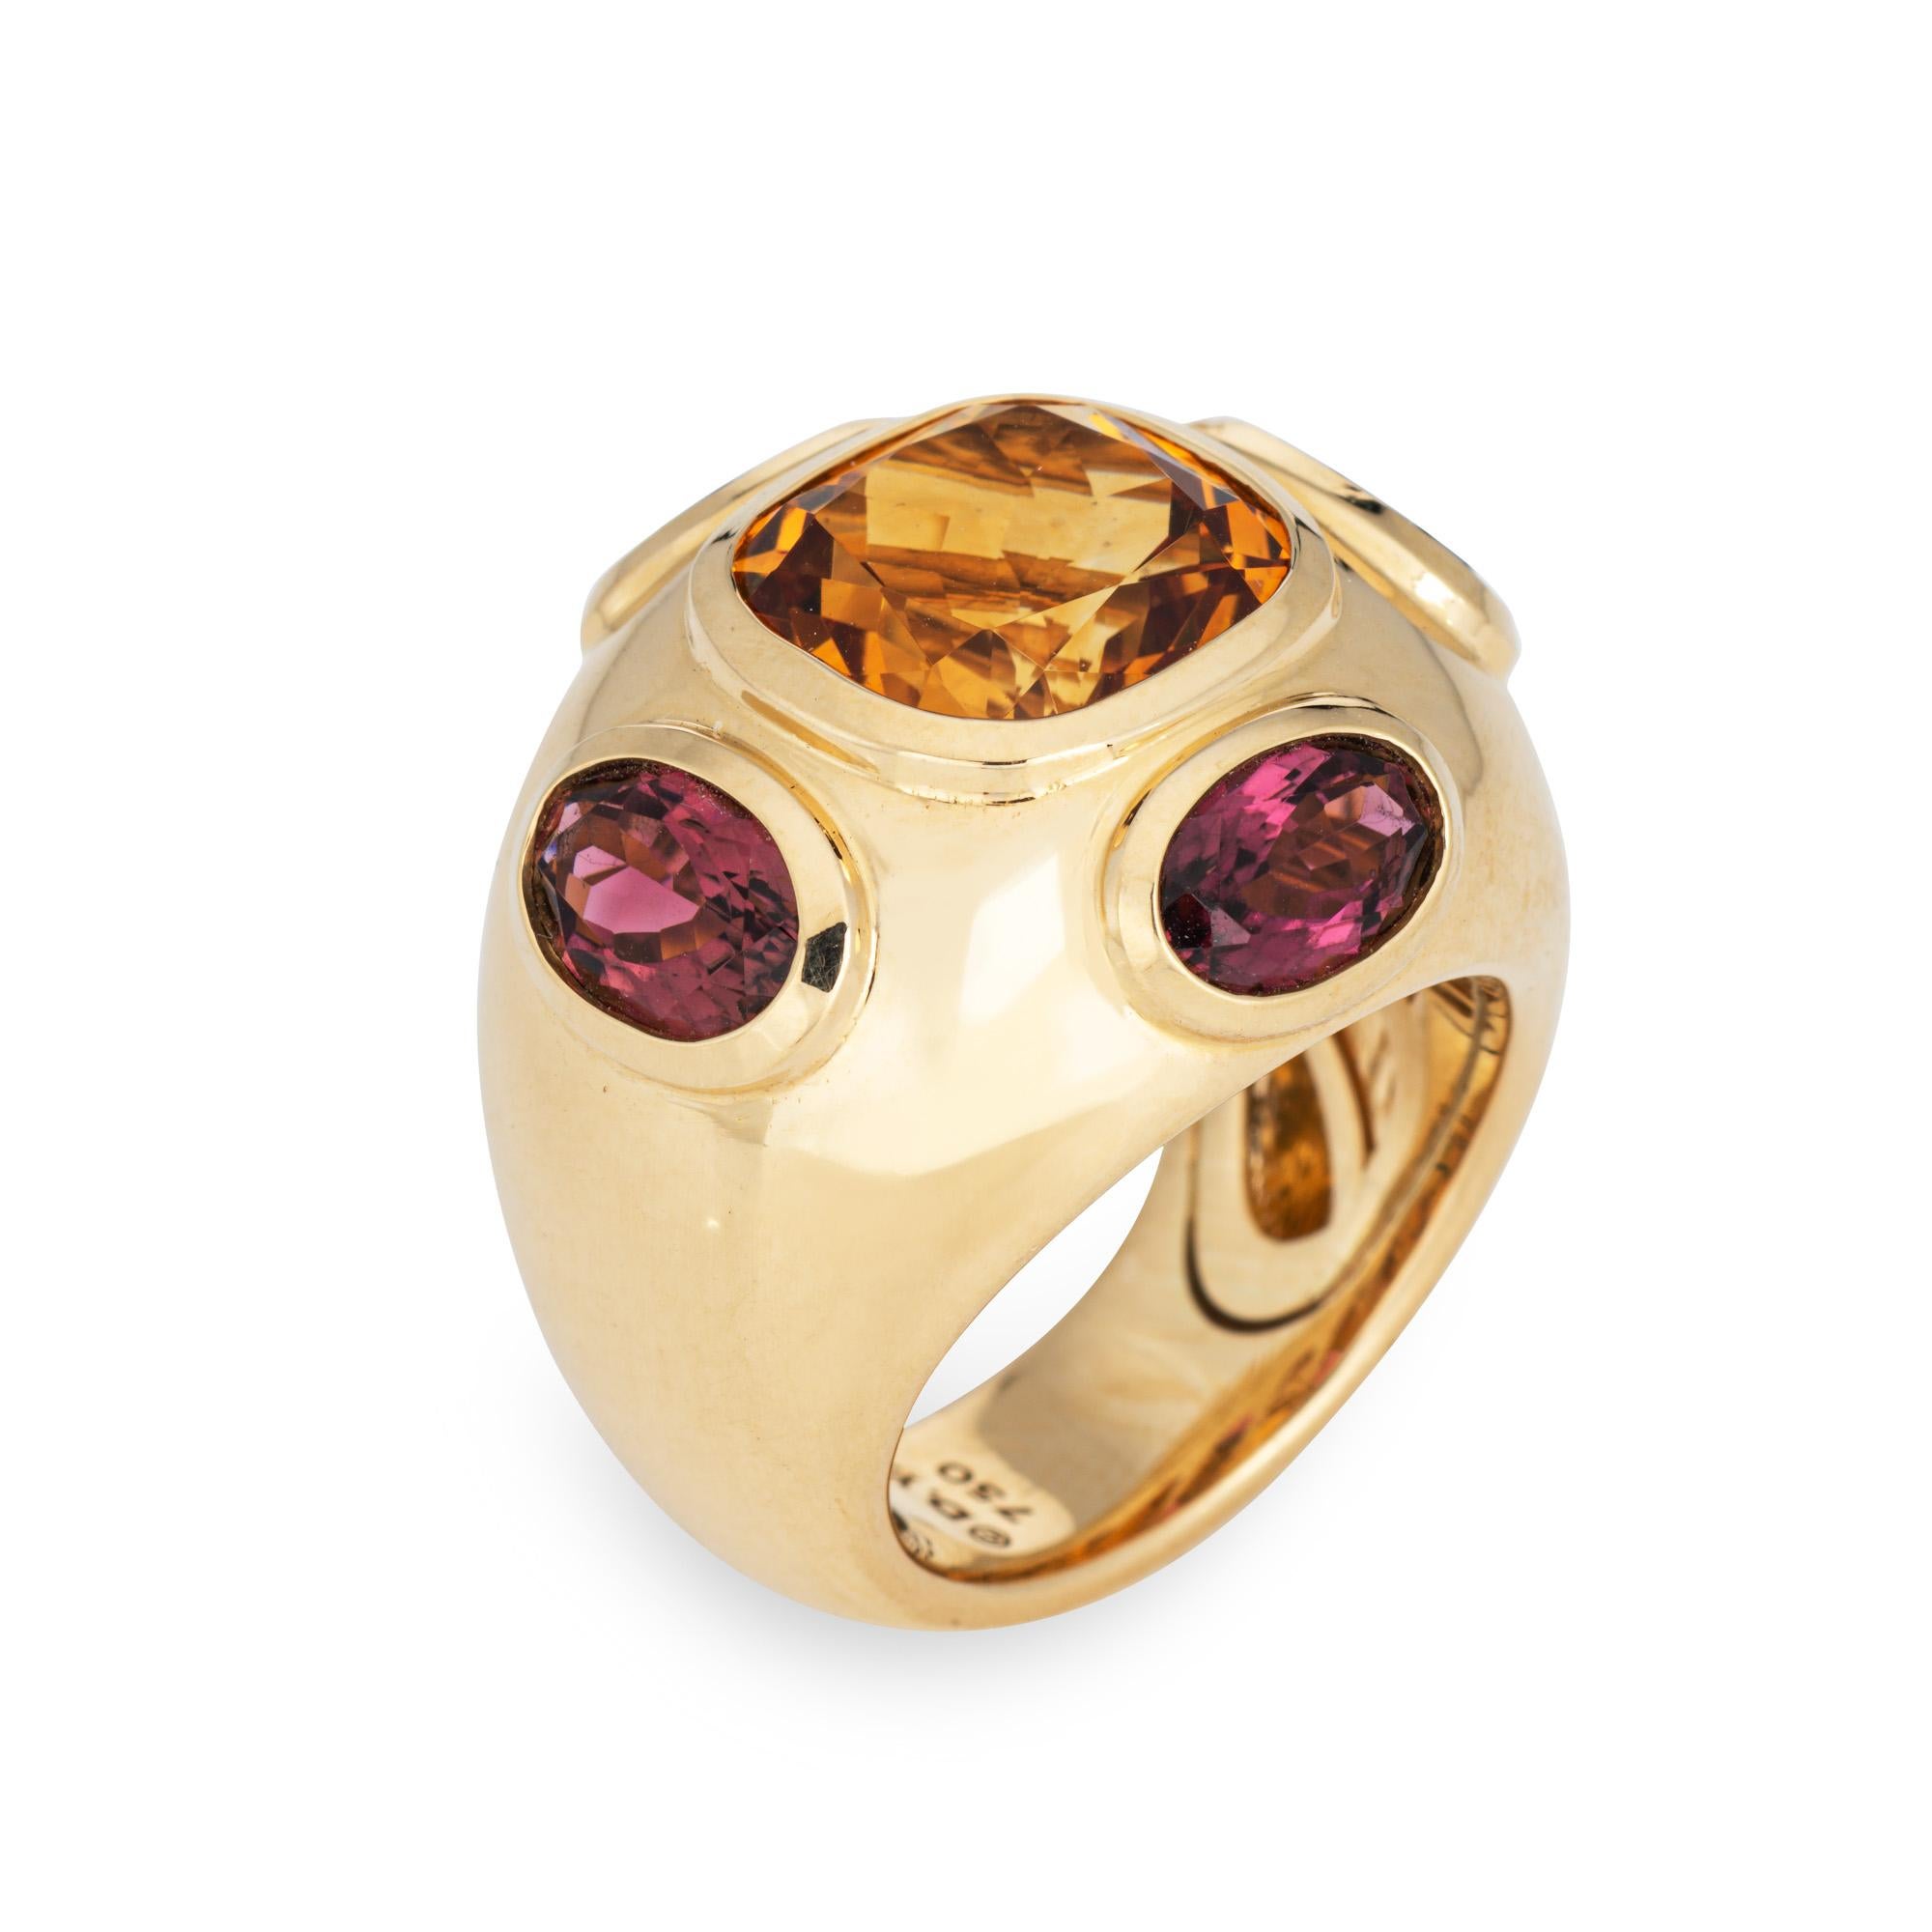 Estate David Yurman Renaissance ring crafted in 18 karat yellow.  

The out of production David Yurman ring is set with a center set citrine measuring 10mm. Rhodolite garnets measure 8mm x 5mm. The gemstones are in very good condition and free of